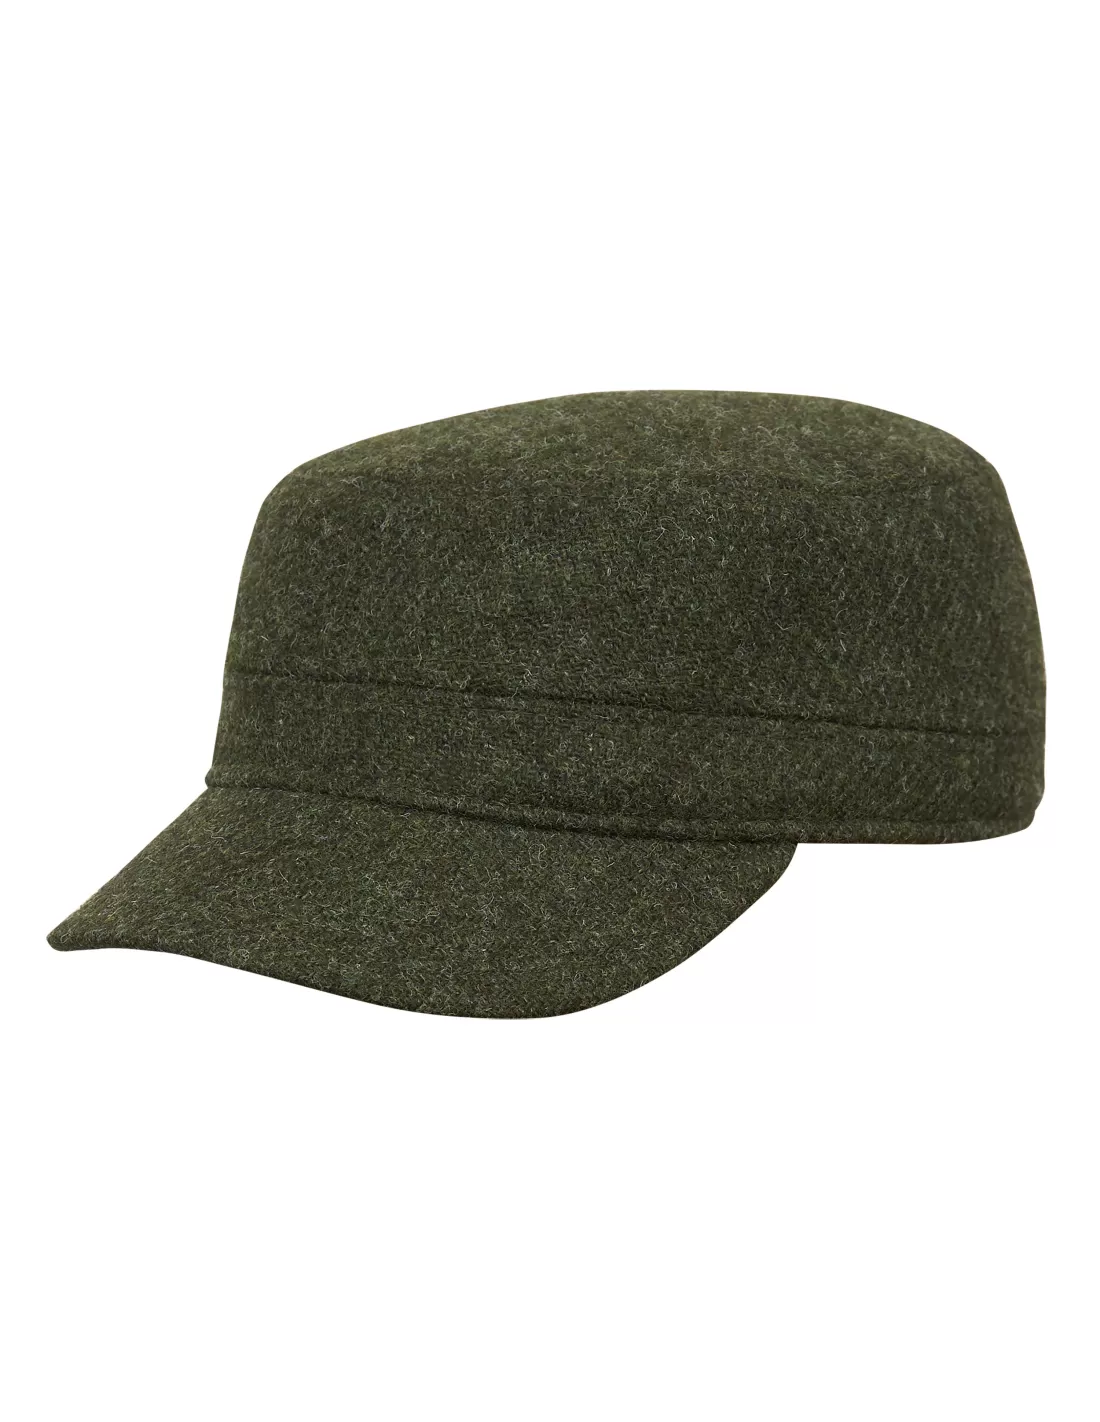 Stockists for Grey JP Tweed cap in All